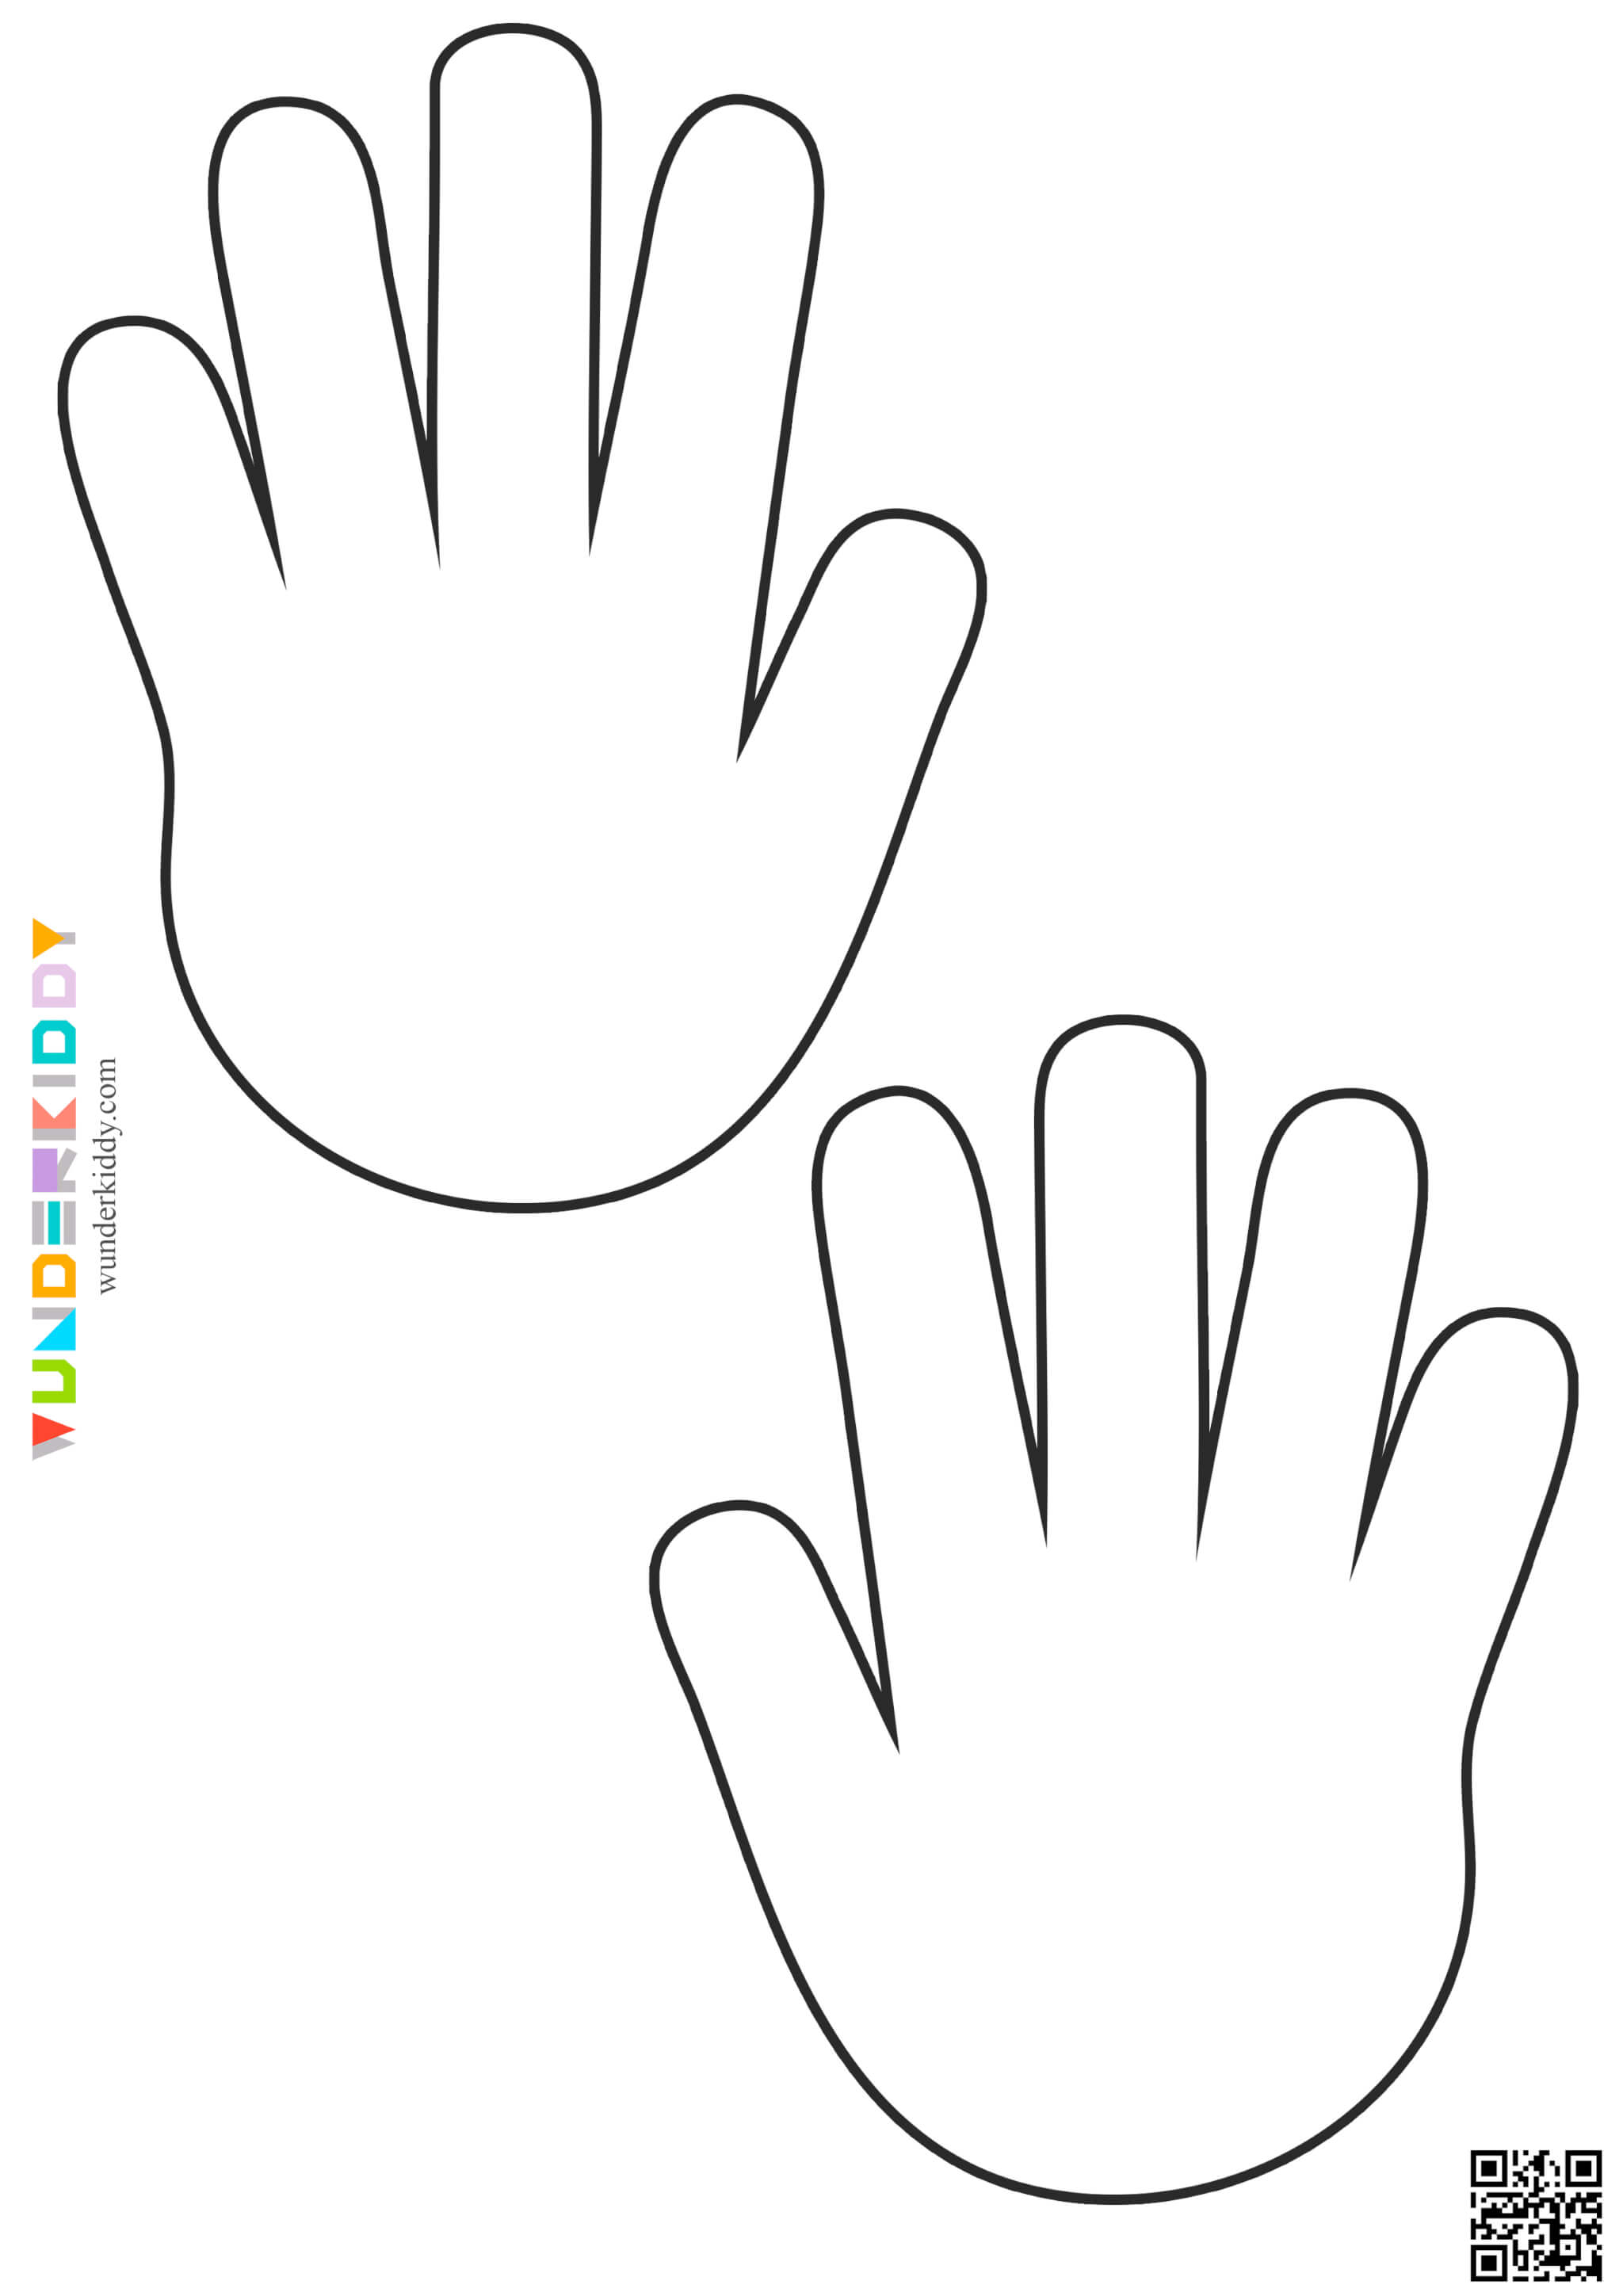 Printable Hands Template - Image 9